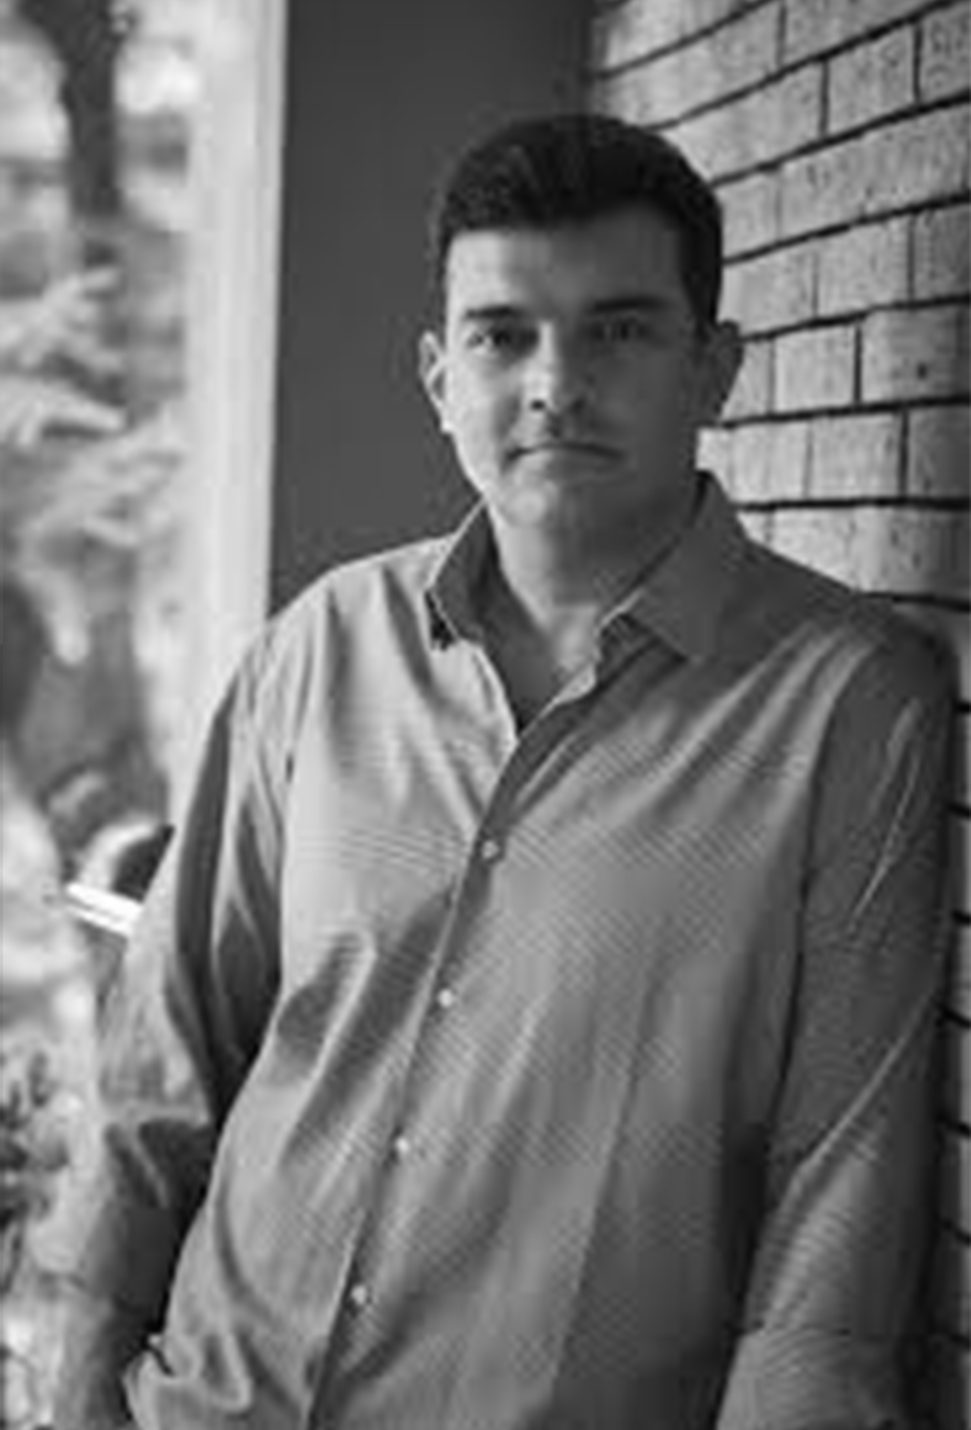 Siddharth Roy Kapur - Film Producer, All About Music virtual edition 2020 Speaker,